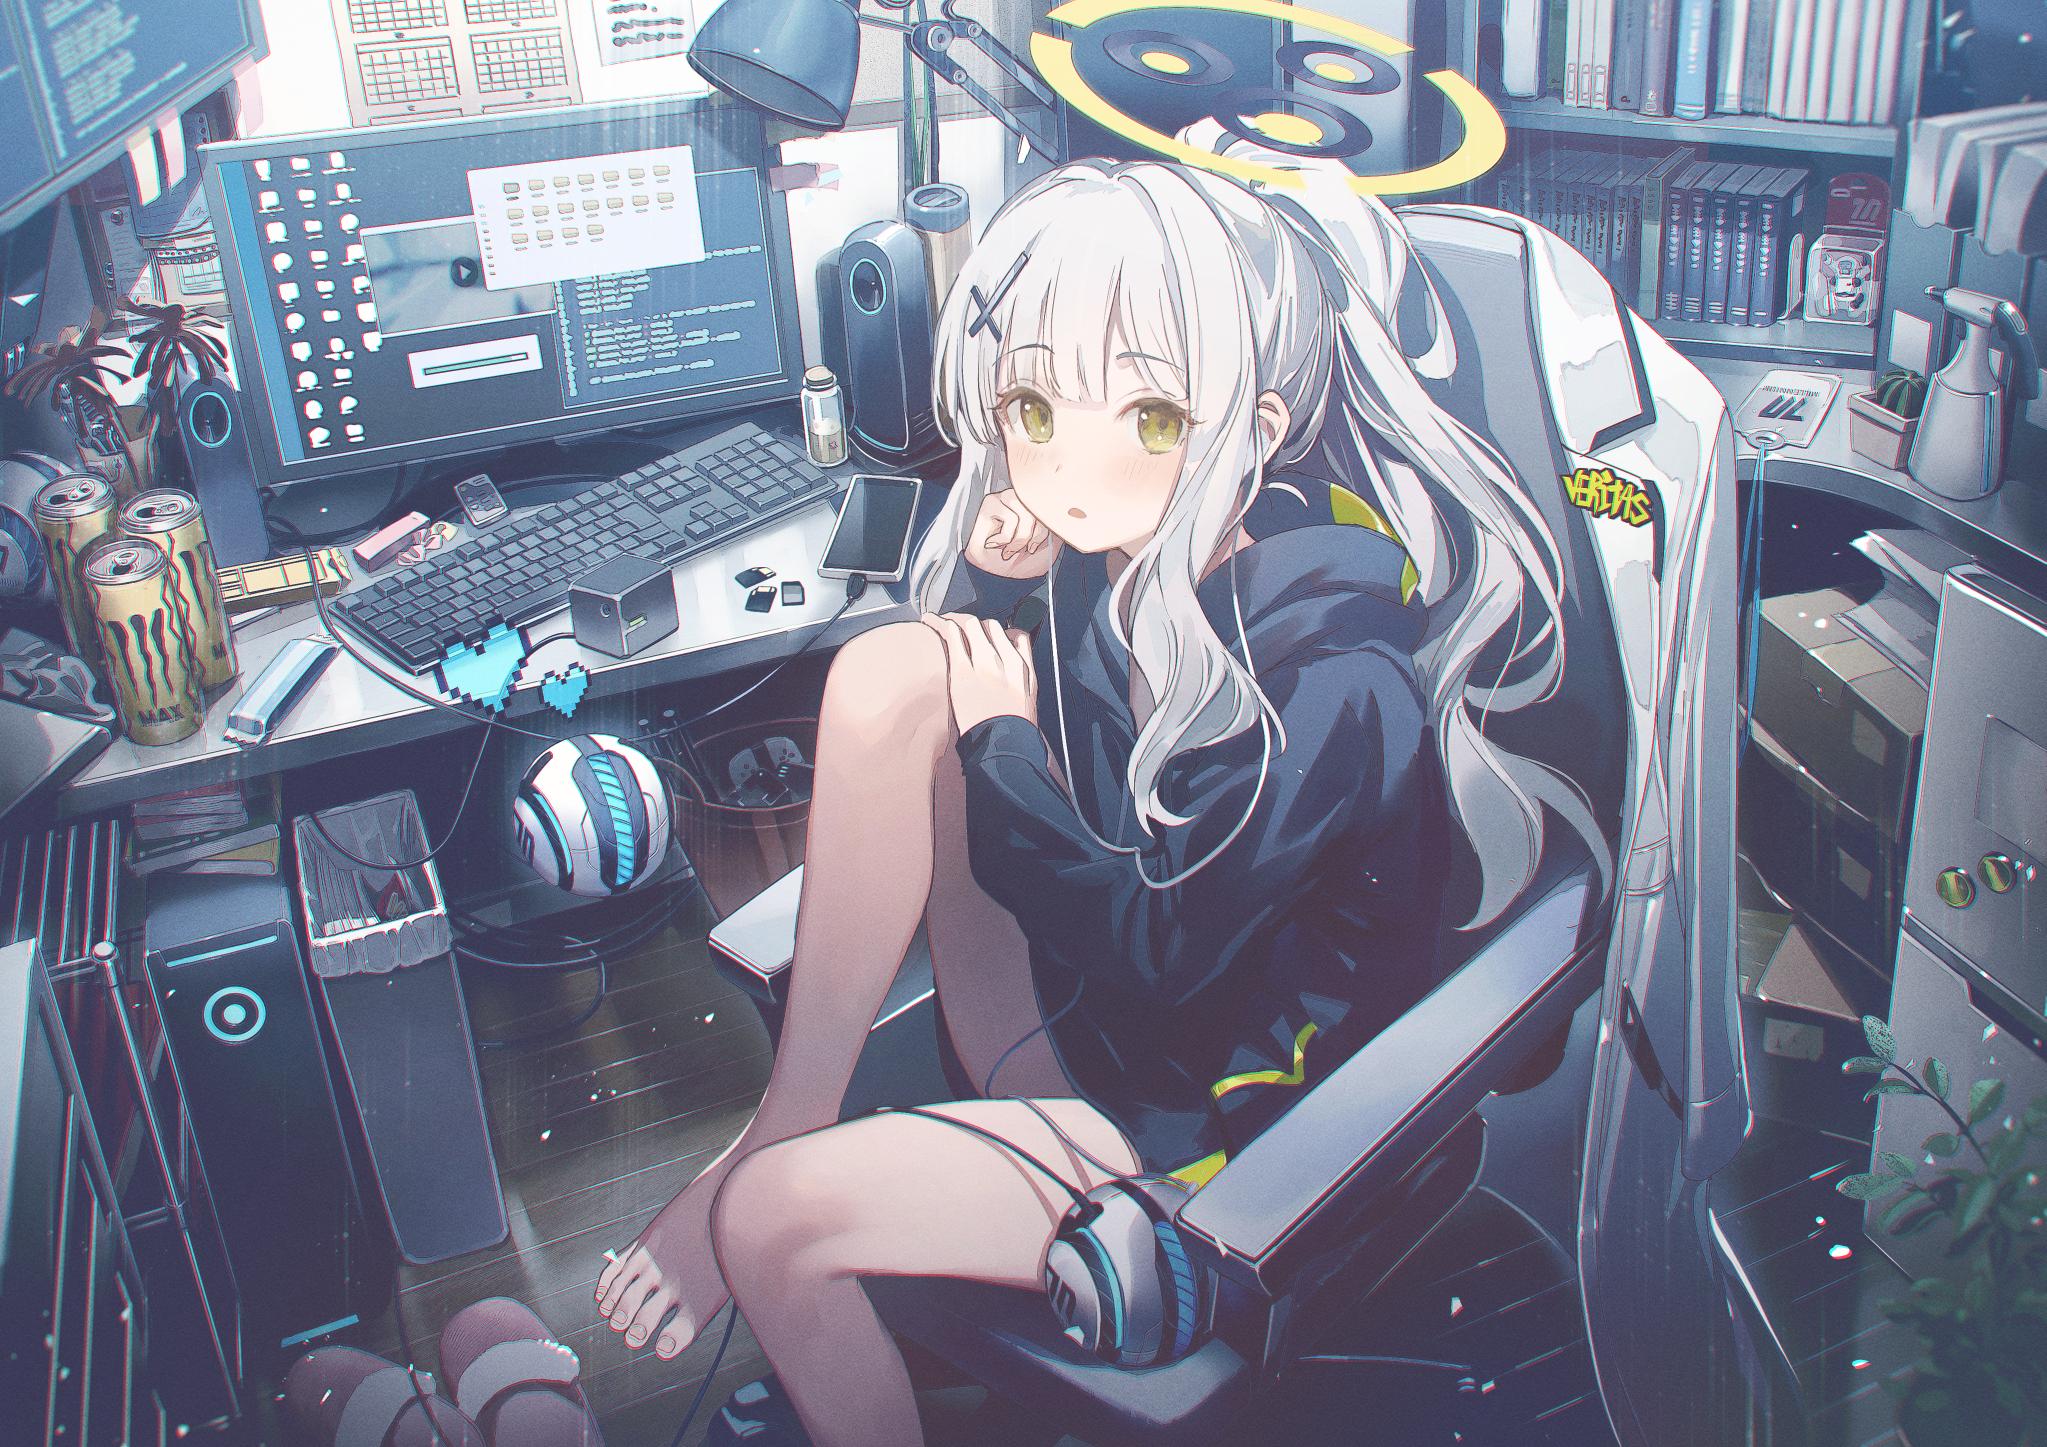 Anime 2047x1447 Blue Archive Omagari Hare (Blue Archive) anime anime girls barefoot drink food green eyes gray hair computer sitting Pixiv looking at viewer Kaerunoko armchair women indoors heart ponytail open mouth blushing bent legs lamp can desk Monster Energy phone leaves trash bin hands on knees long hair